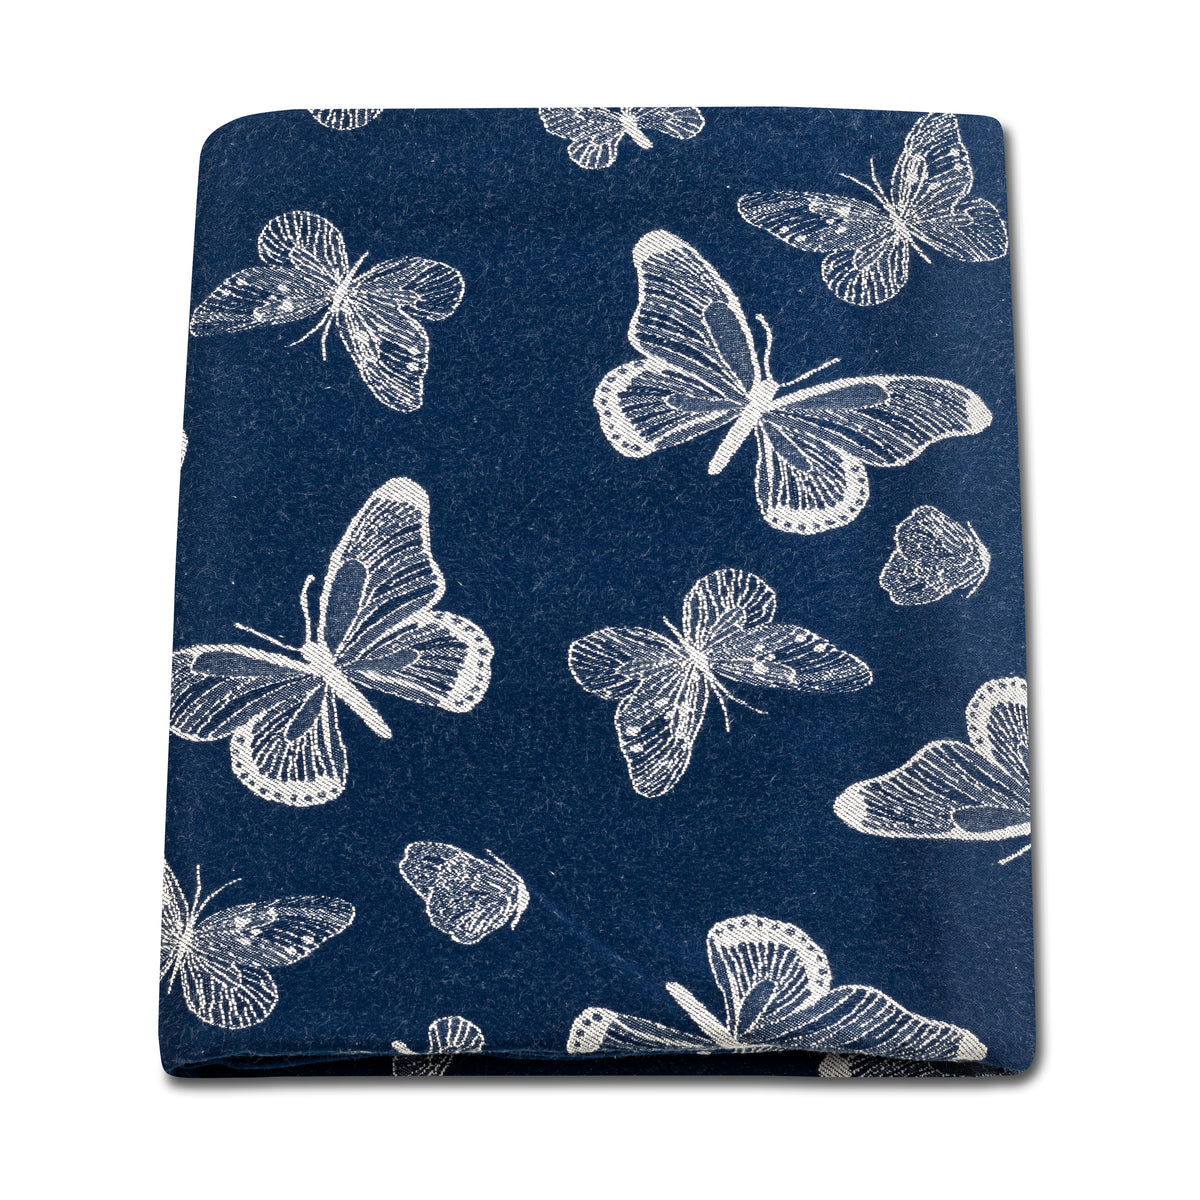 Butterfly Table Runners